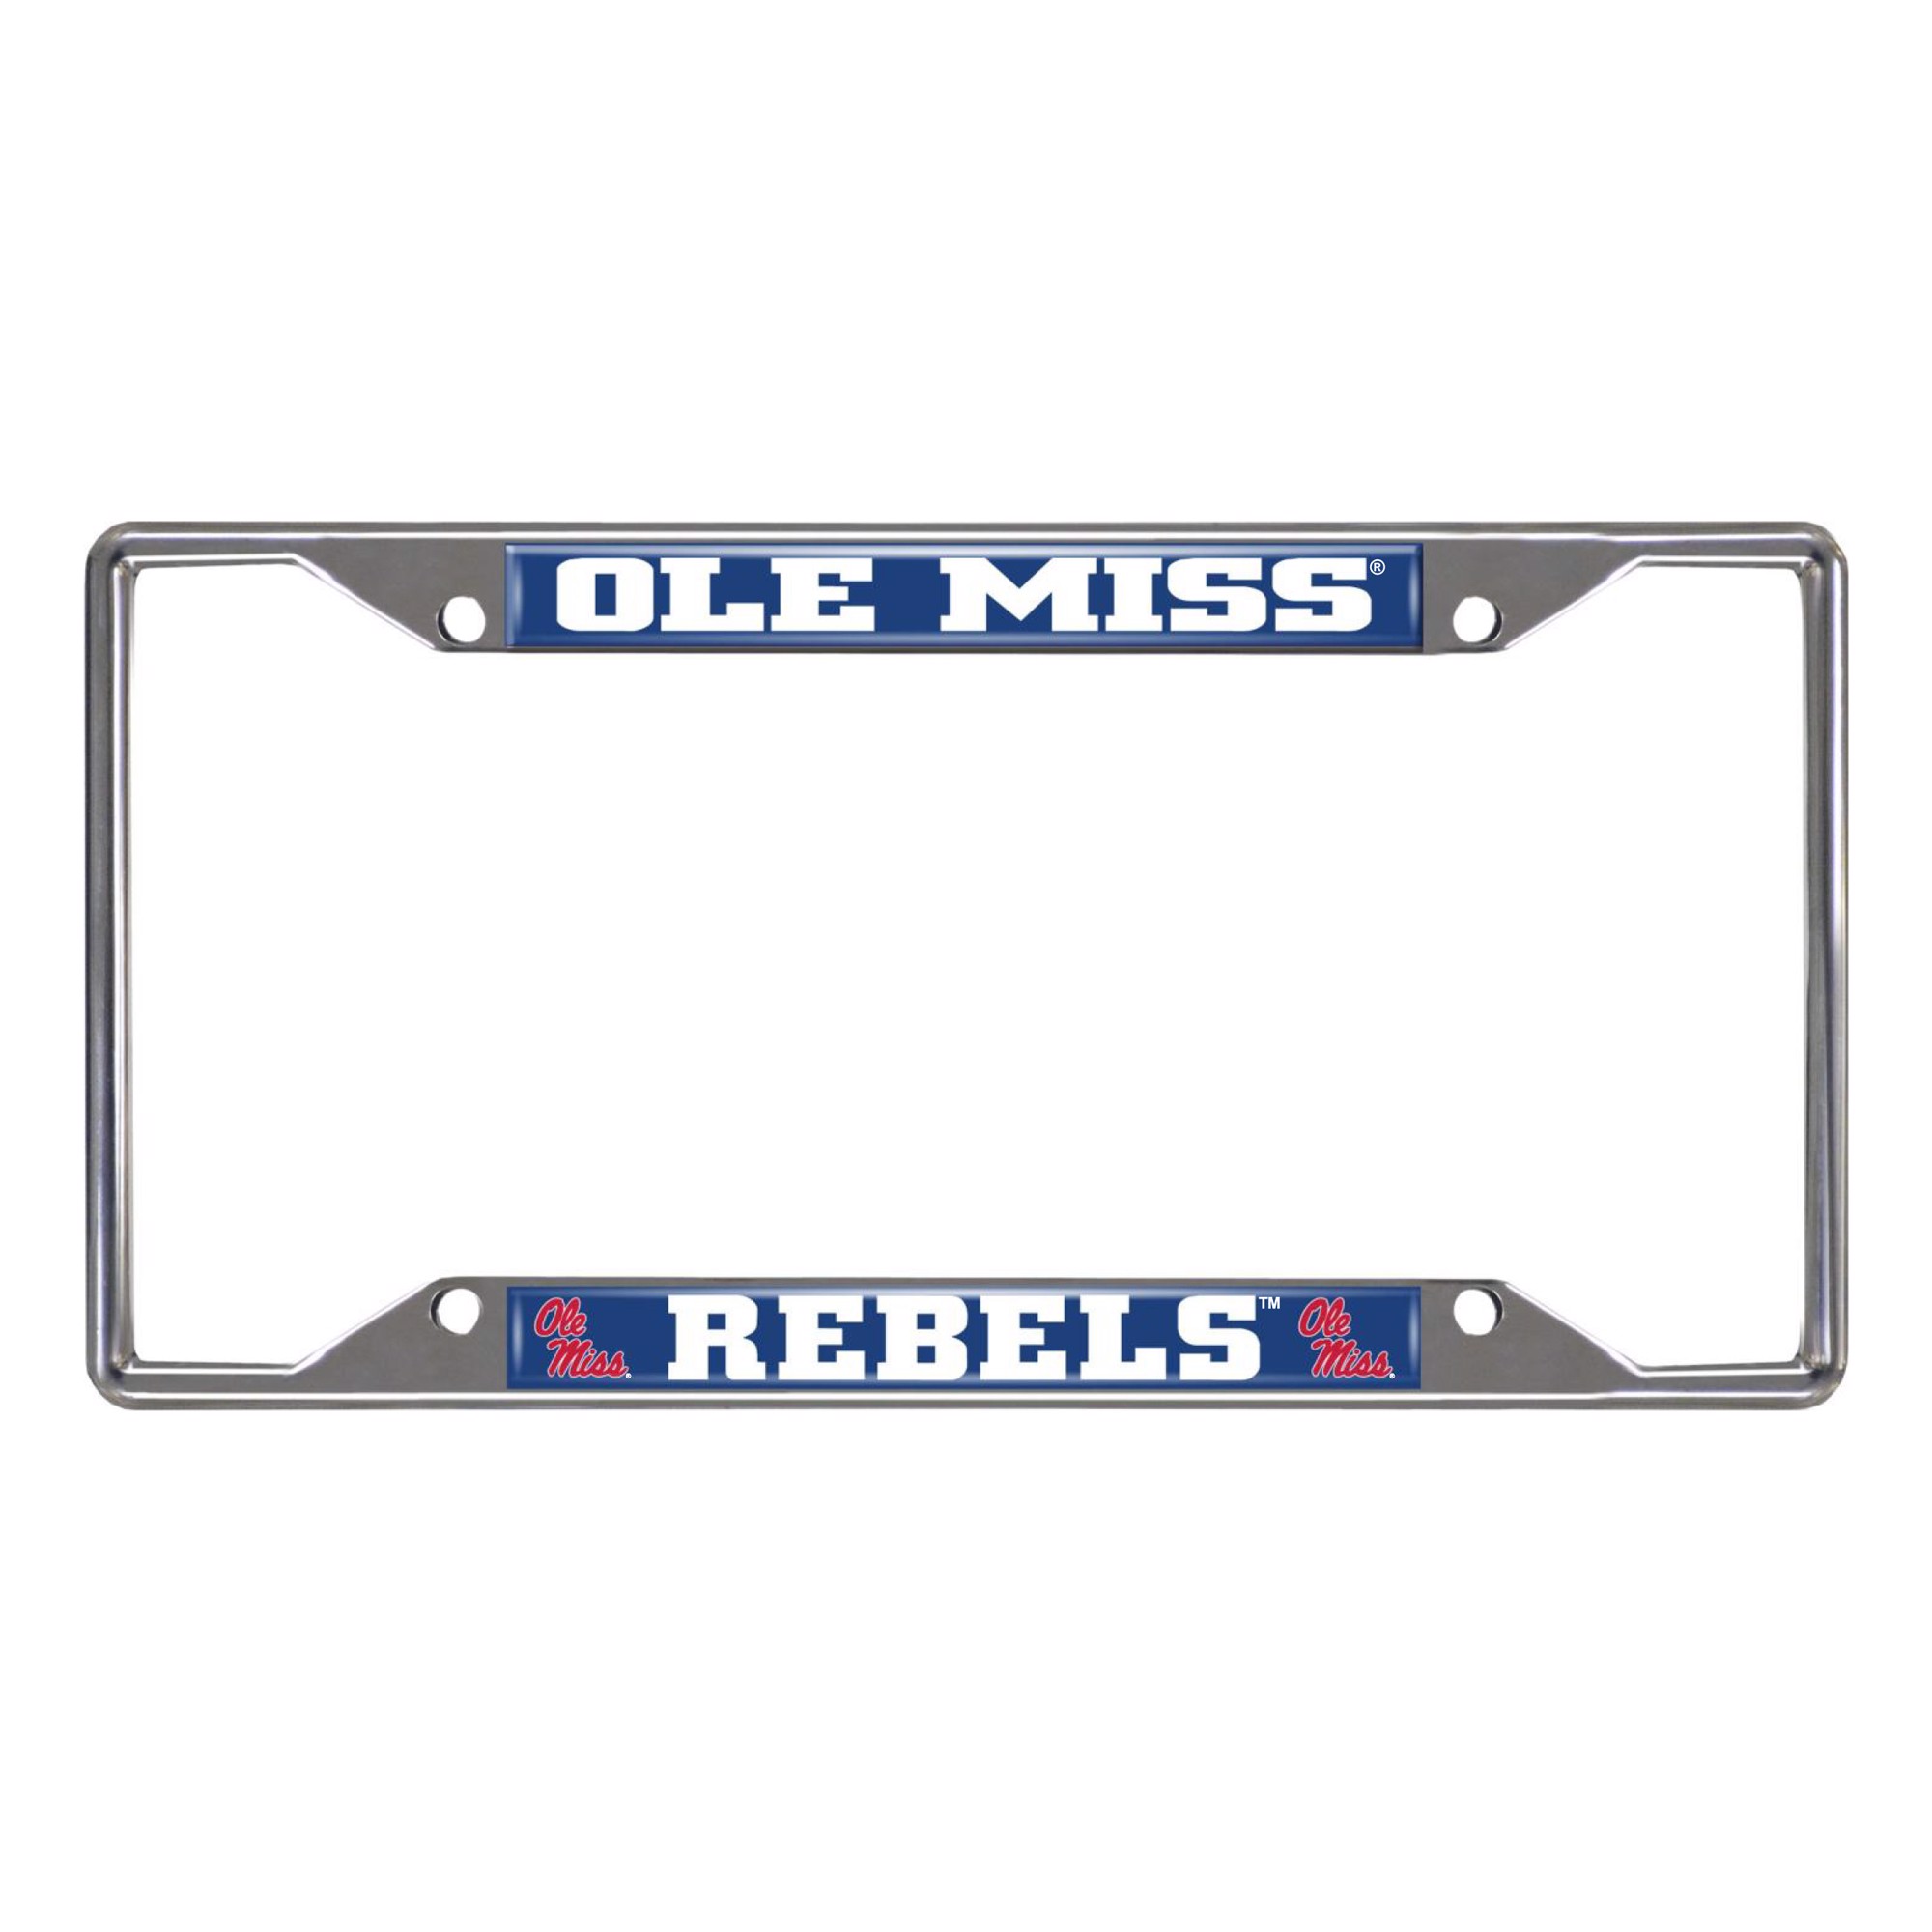 Ole Miss Rebels License Plate Frame | Fanmats - Sports Licensing ...